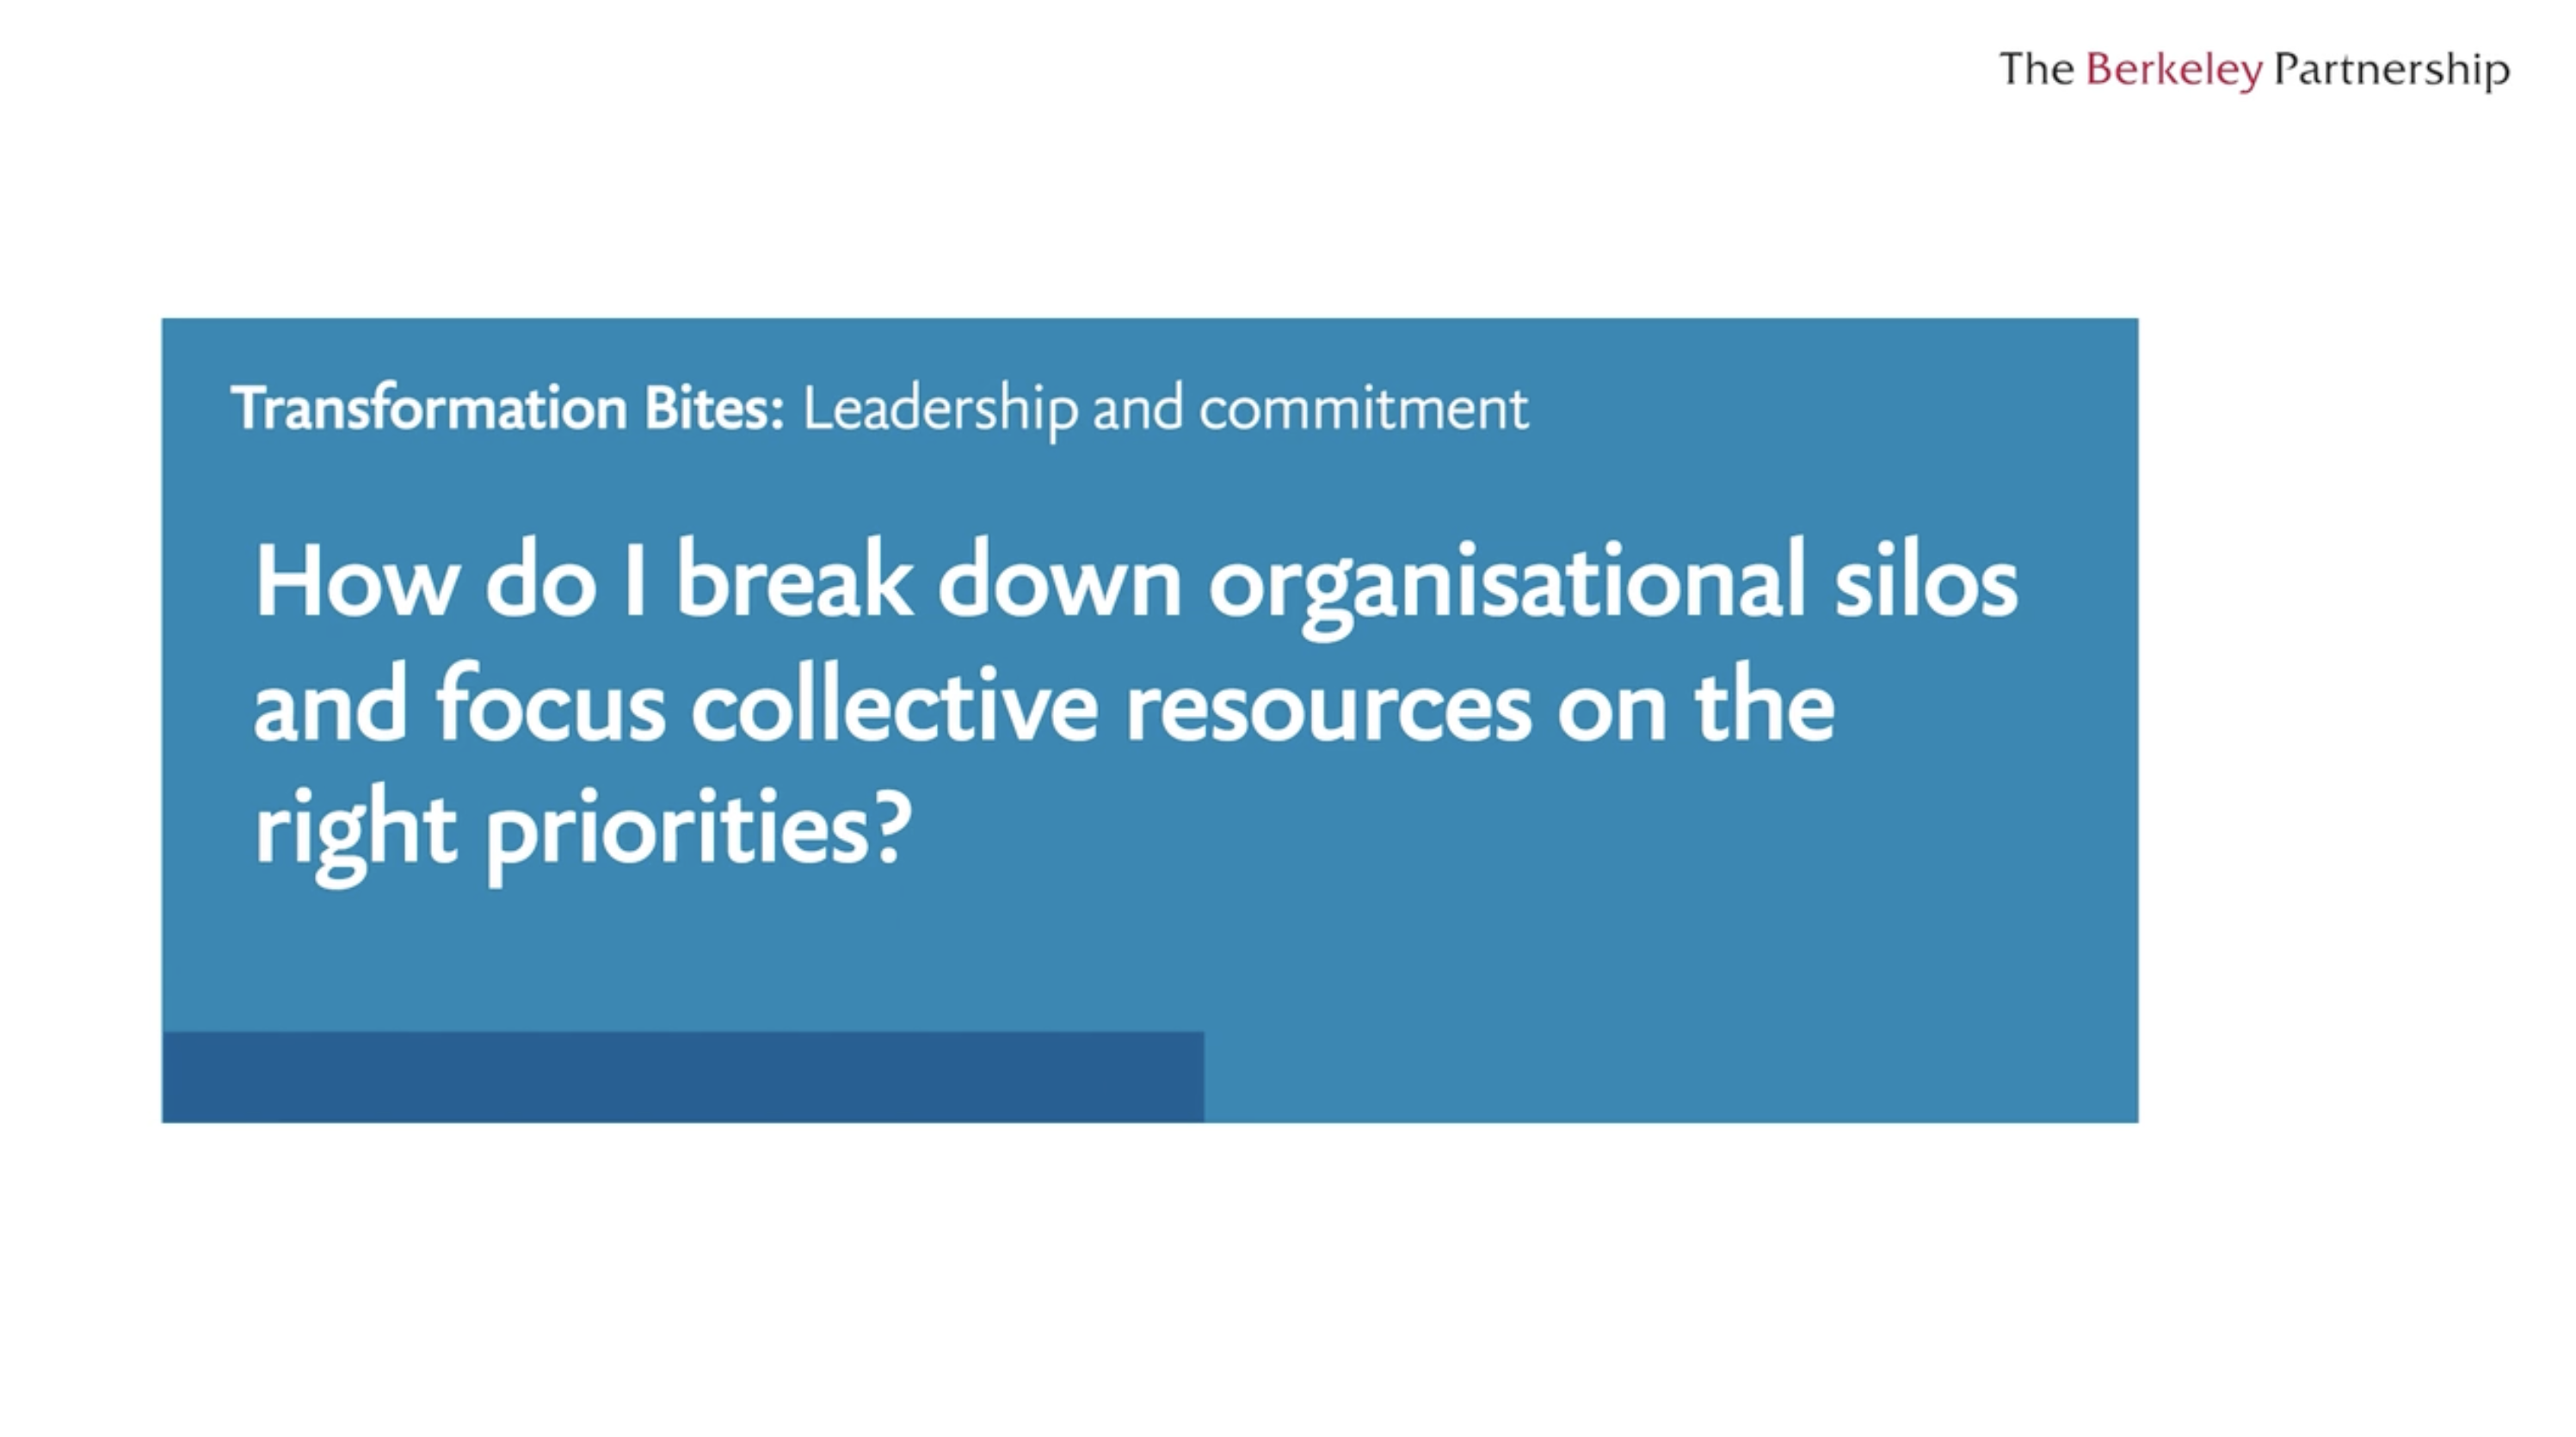 How do I break down organisational silos and focus collective resources on the right priorities?